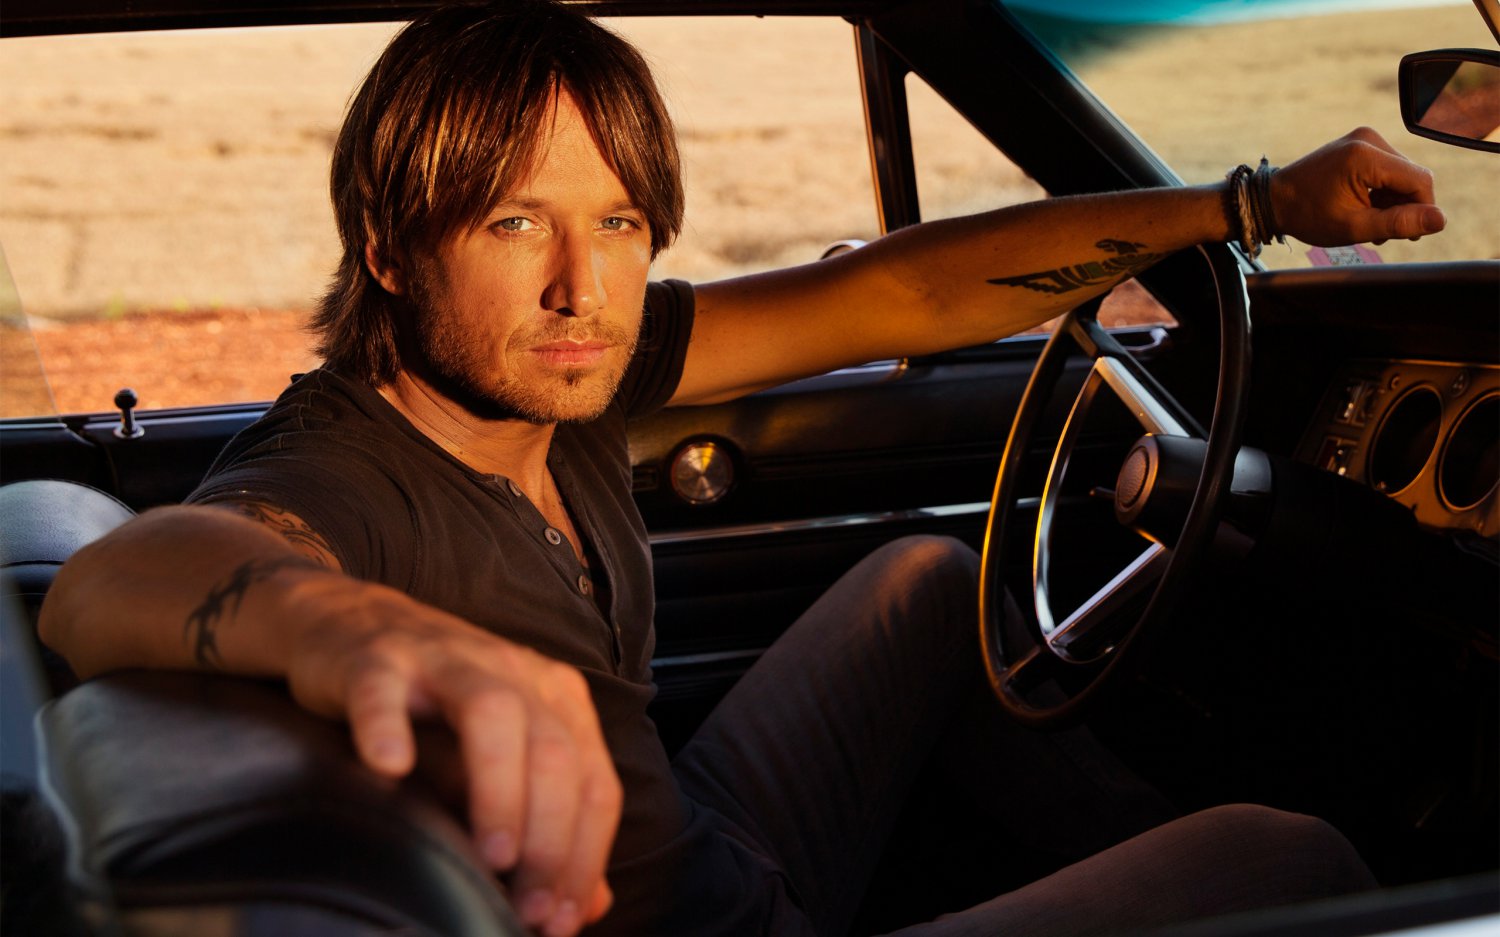 Keith Urban  13"x19" (32cm/49cm) Polyester Fabric Poster